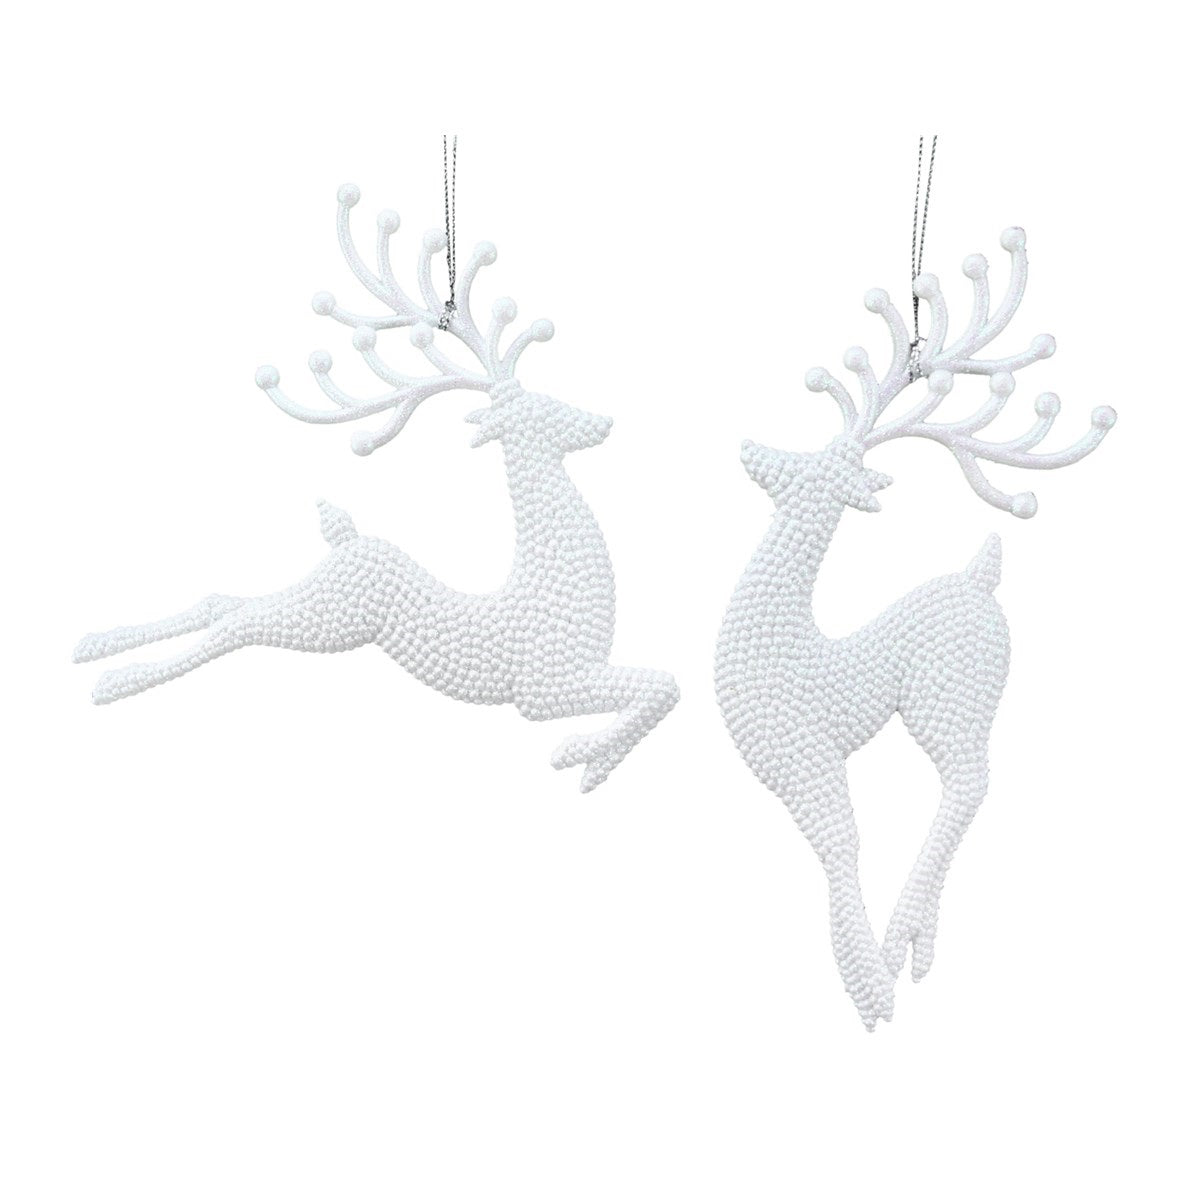 Gisela Graham White Glitter Reindeer Christmas Hanging Decoration - Prancing  Browse our beautiful range of luxury Christmas tree decorations and ornaments for your tree this Christmas.  Add style to your Christmas tree with this elegant white glitter reindeer hanging ornament.